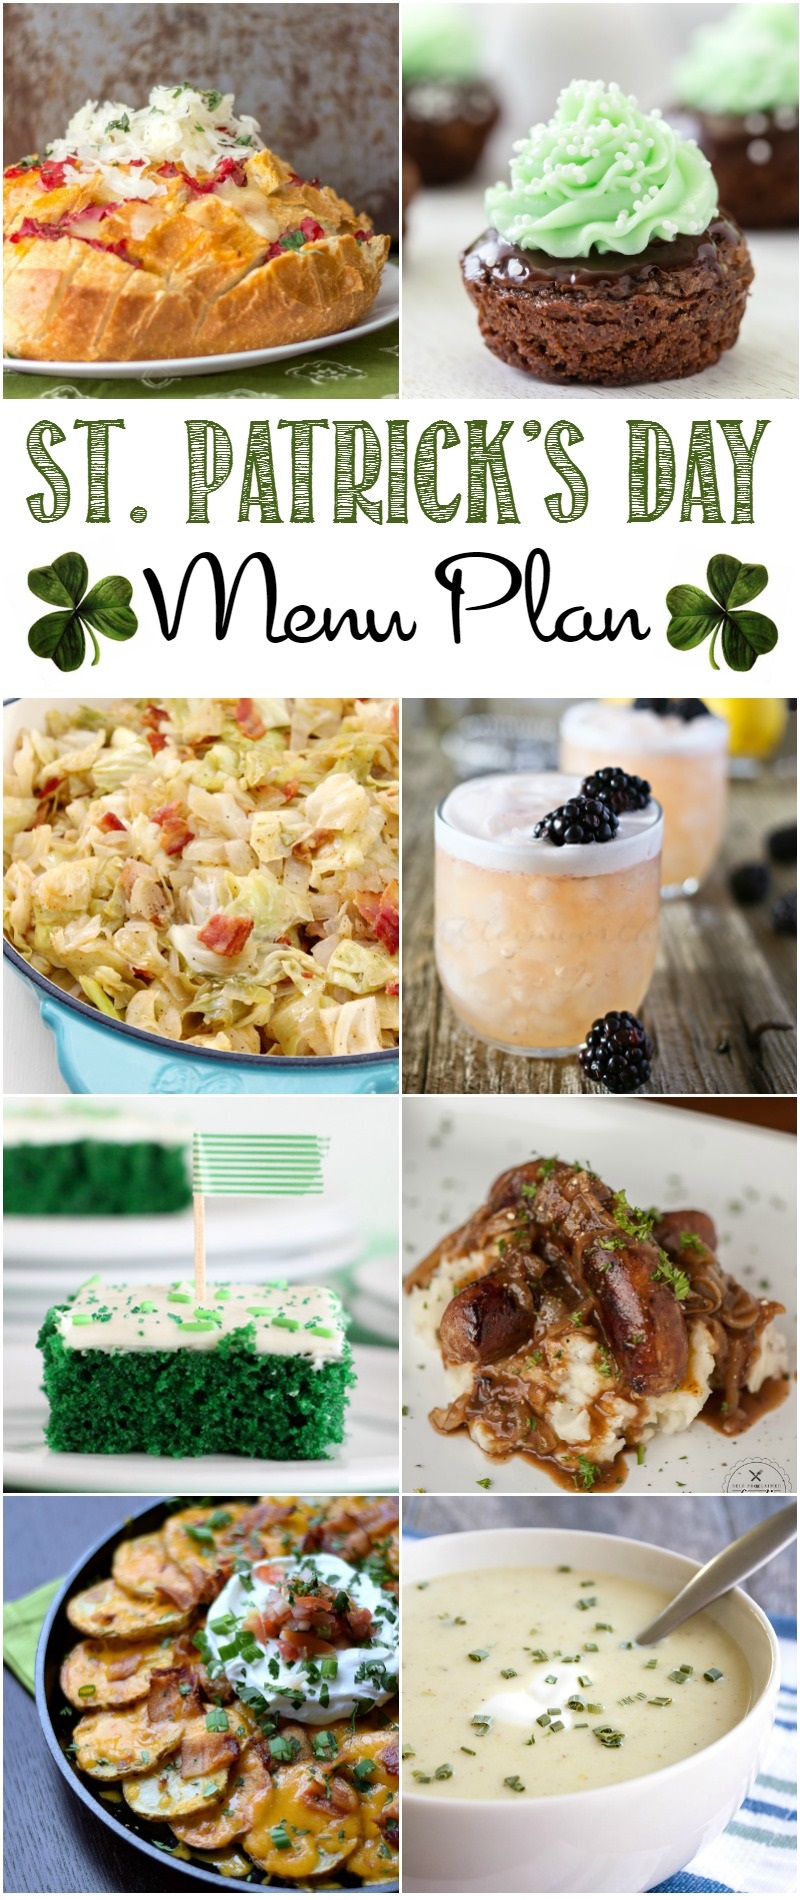 I've got everything you need for the perfect St. Patrick's Day Menu from appetizers to desserts....you'll be feelin' the luck of the Irish for sure.